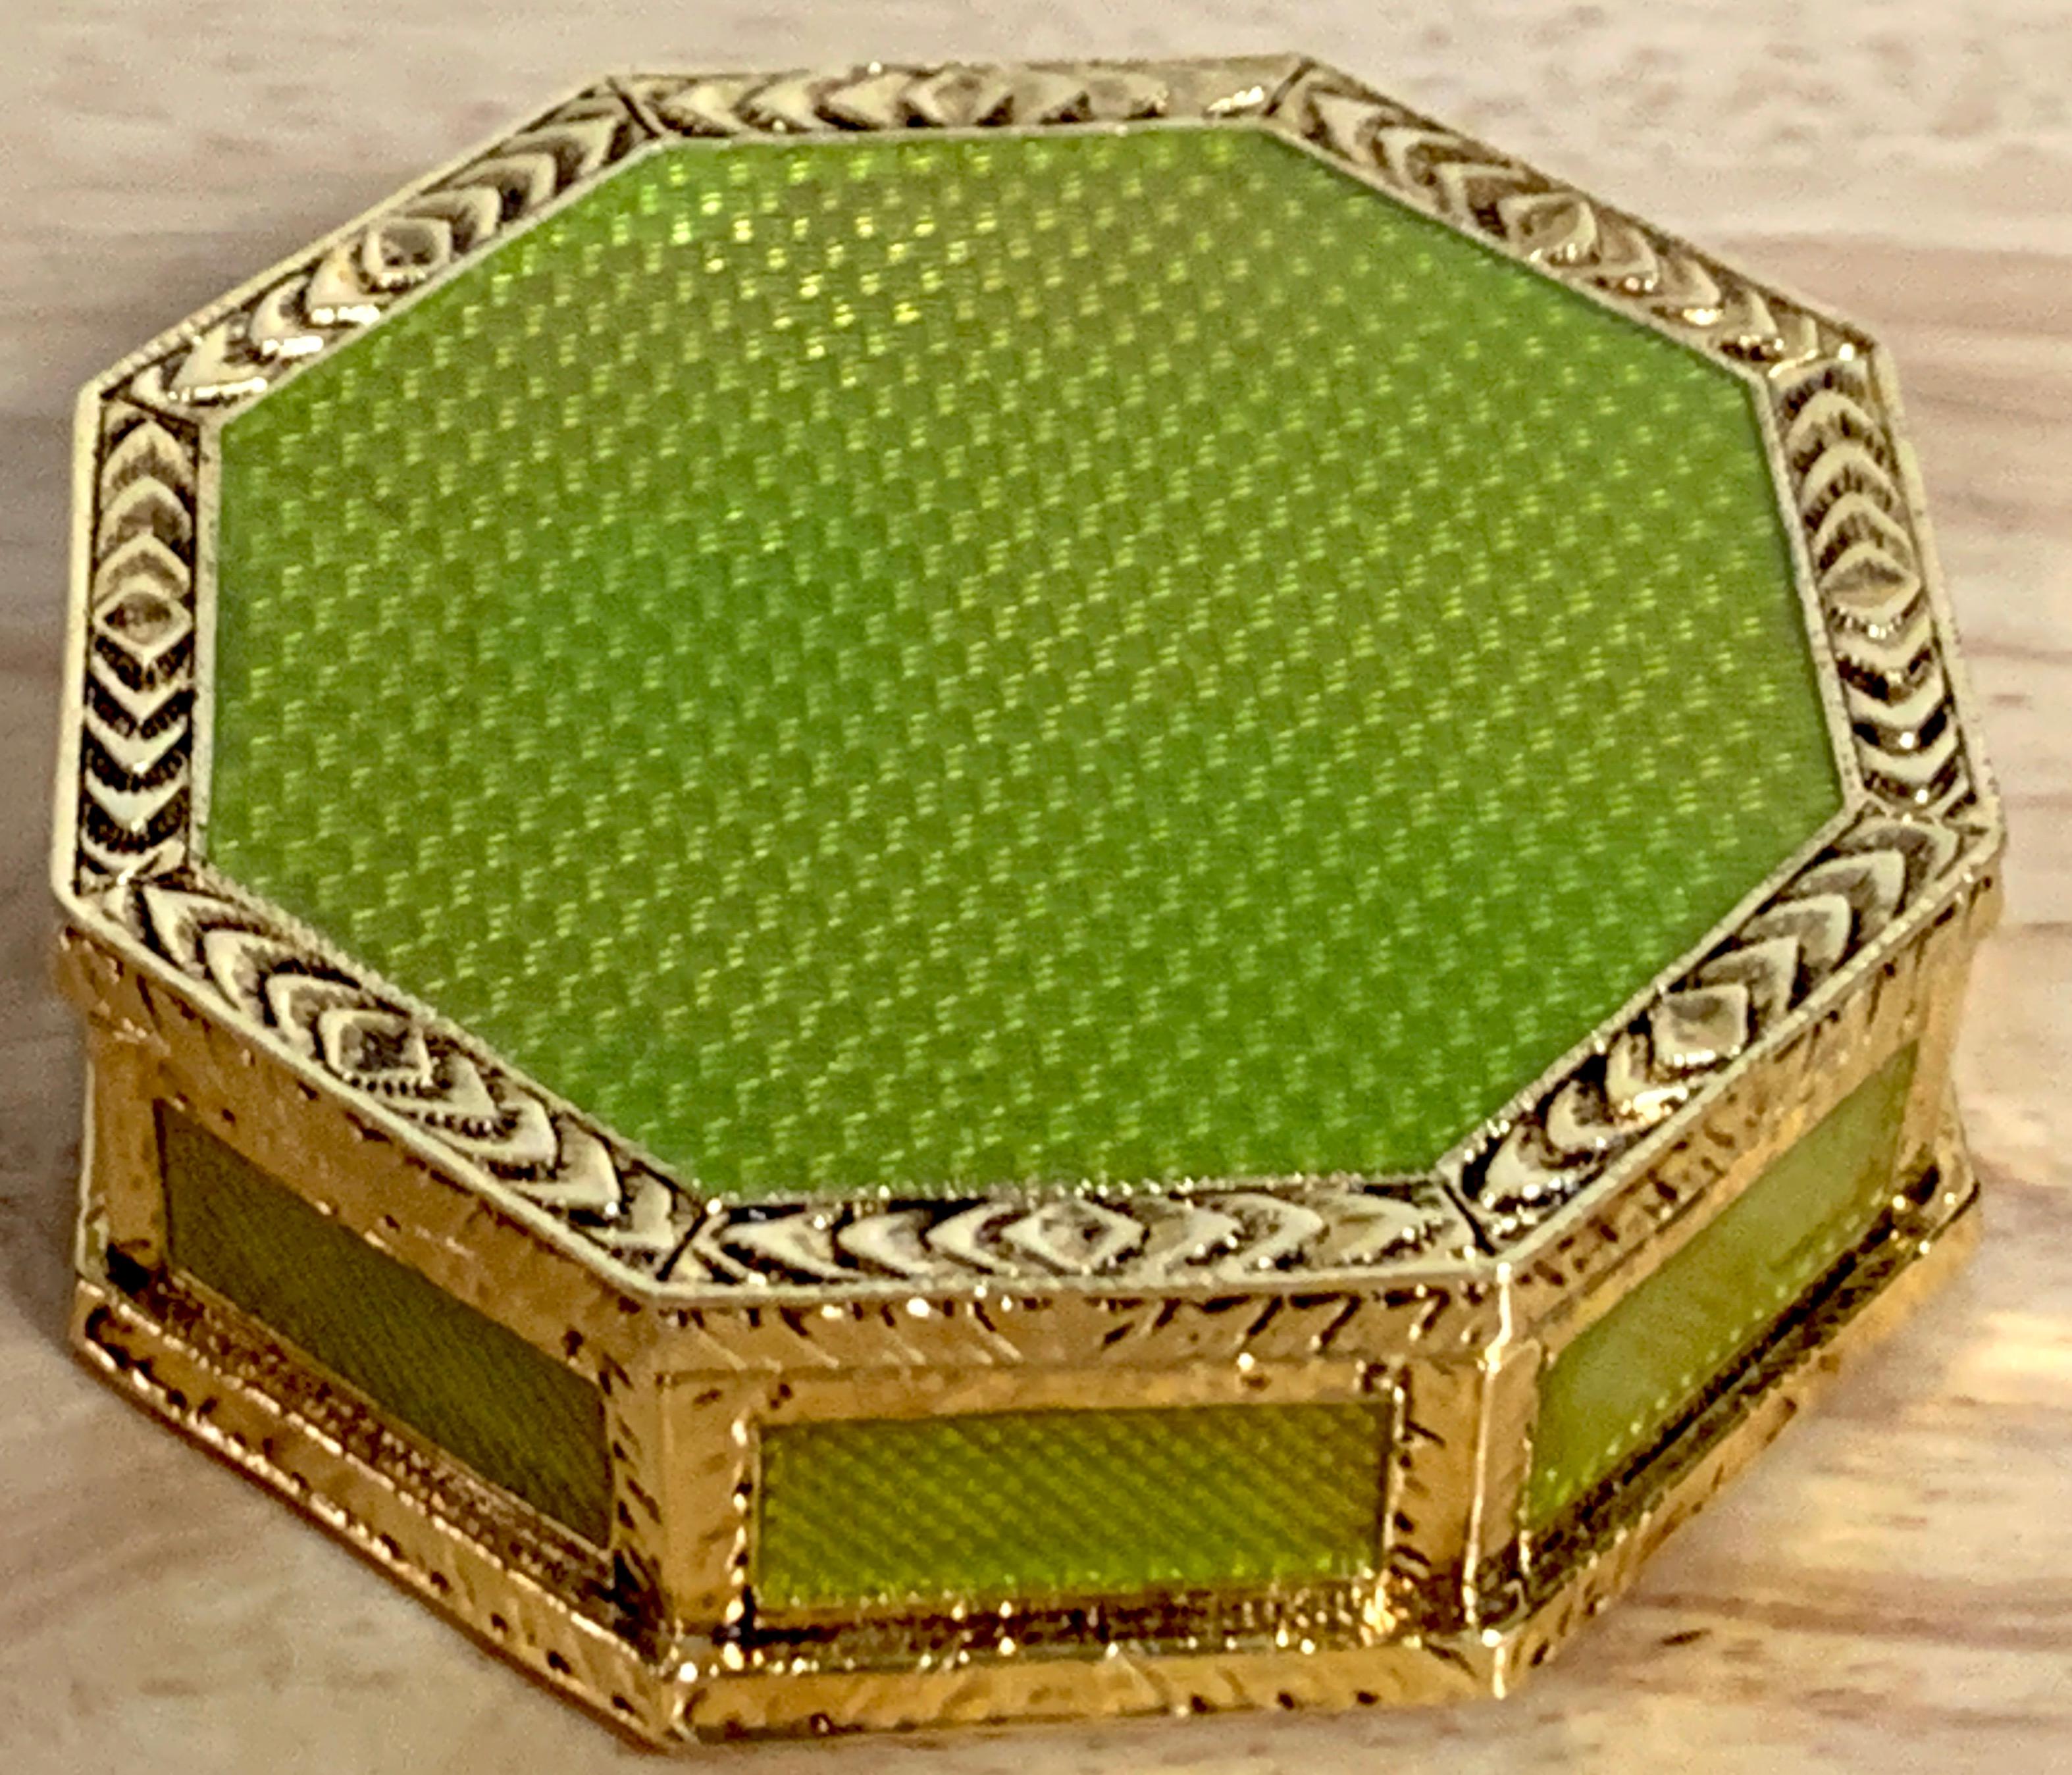 20th Century Neoclassical Octagonal Green Guilloche & Ormolu Box, after Faberge For Sale